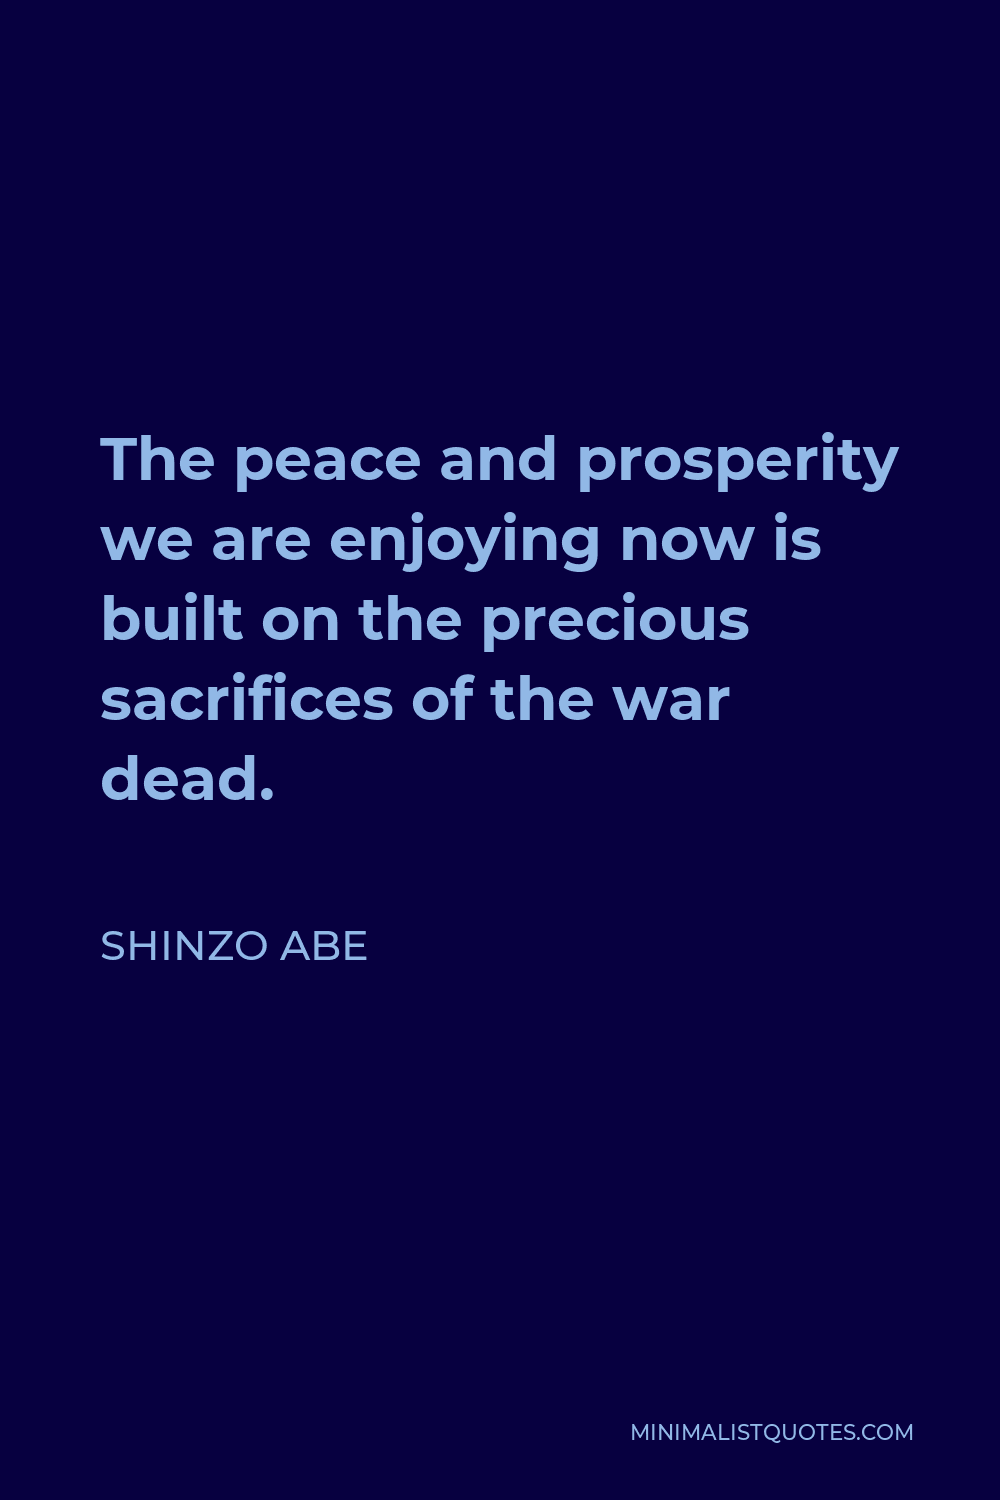 Shinzo Abe Quote - The peace and prosperity we are enjoying now is built on the precious sacrifices of the war dead.